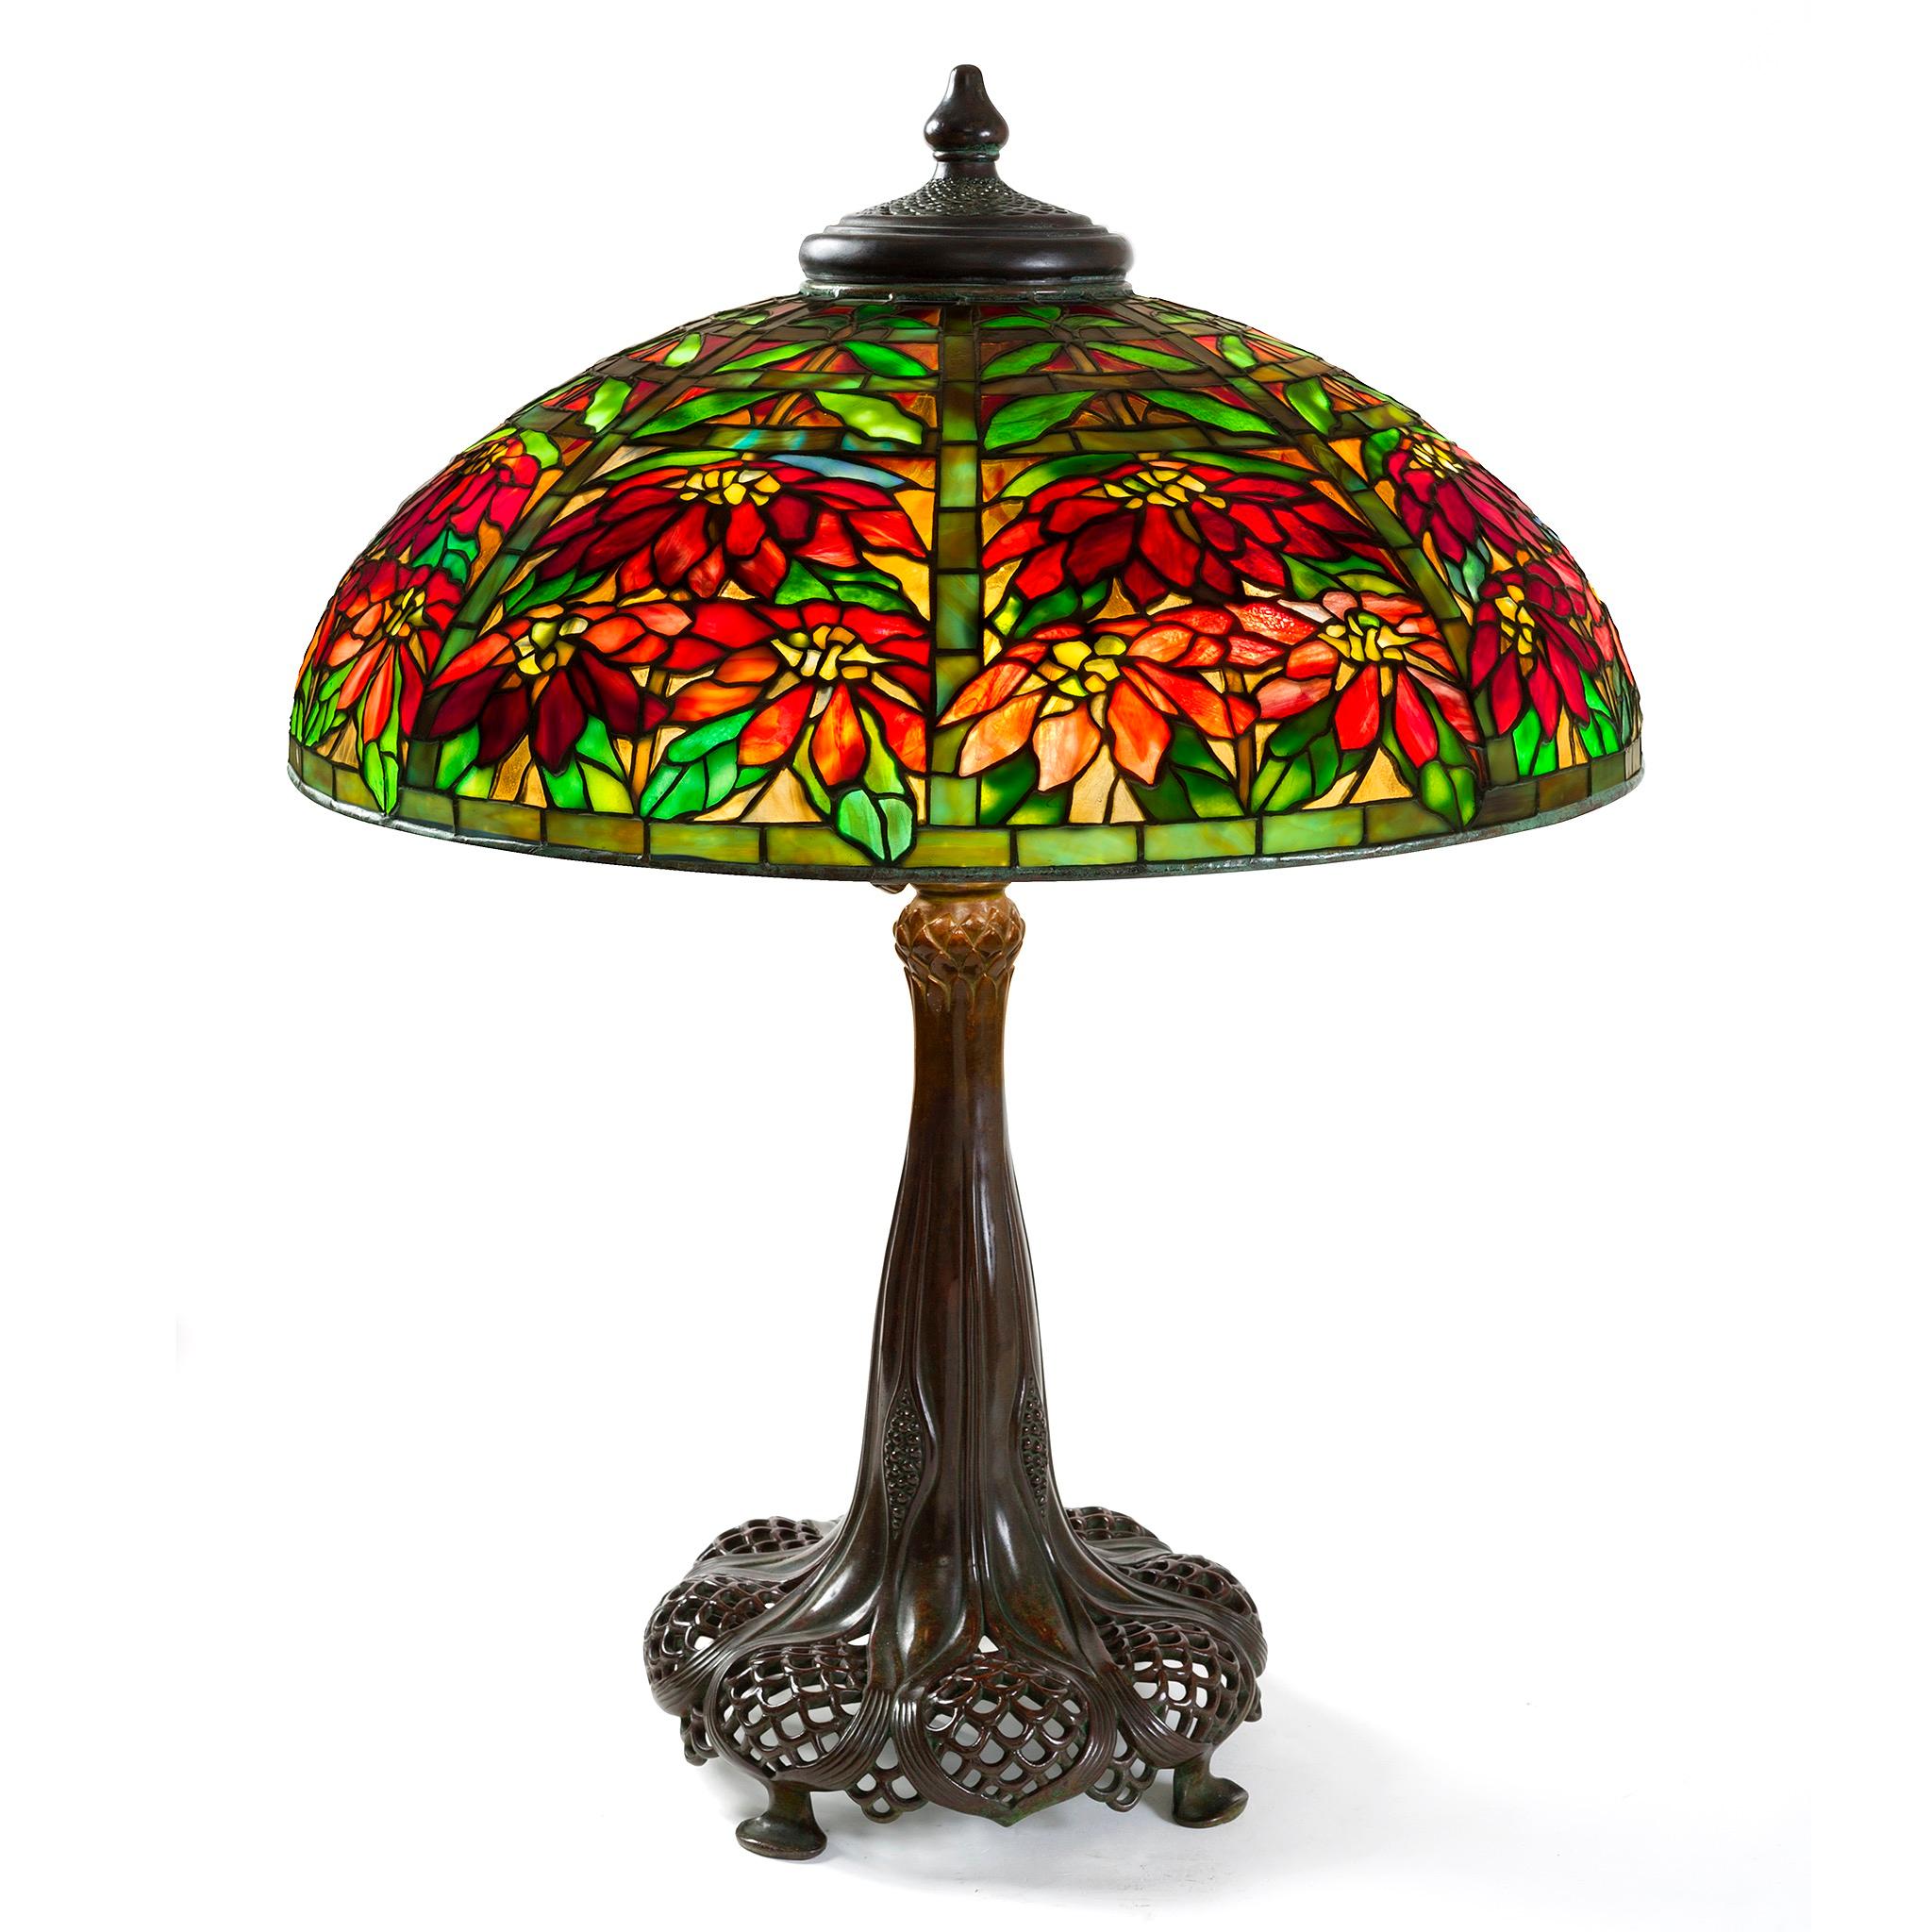 A stunning study in perspective and a charming example of the multifaceted capabilities of Louis Comfort Tiffany's team of designers, the leaded glass shade and bronze base of this 